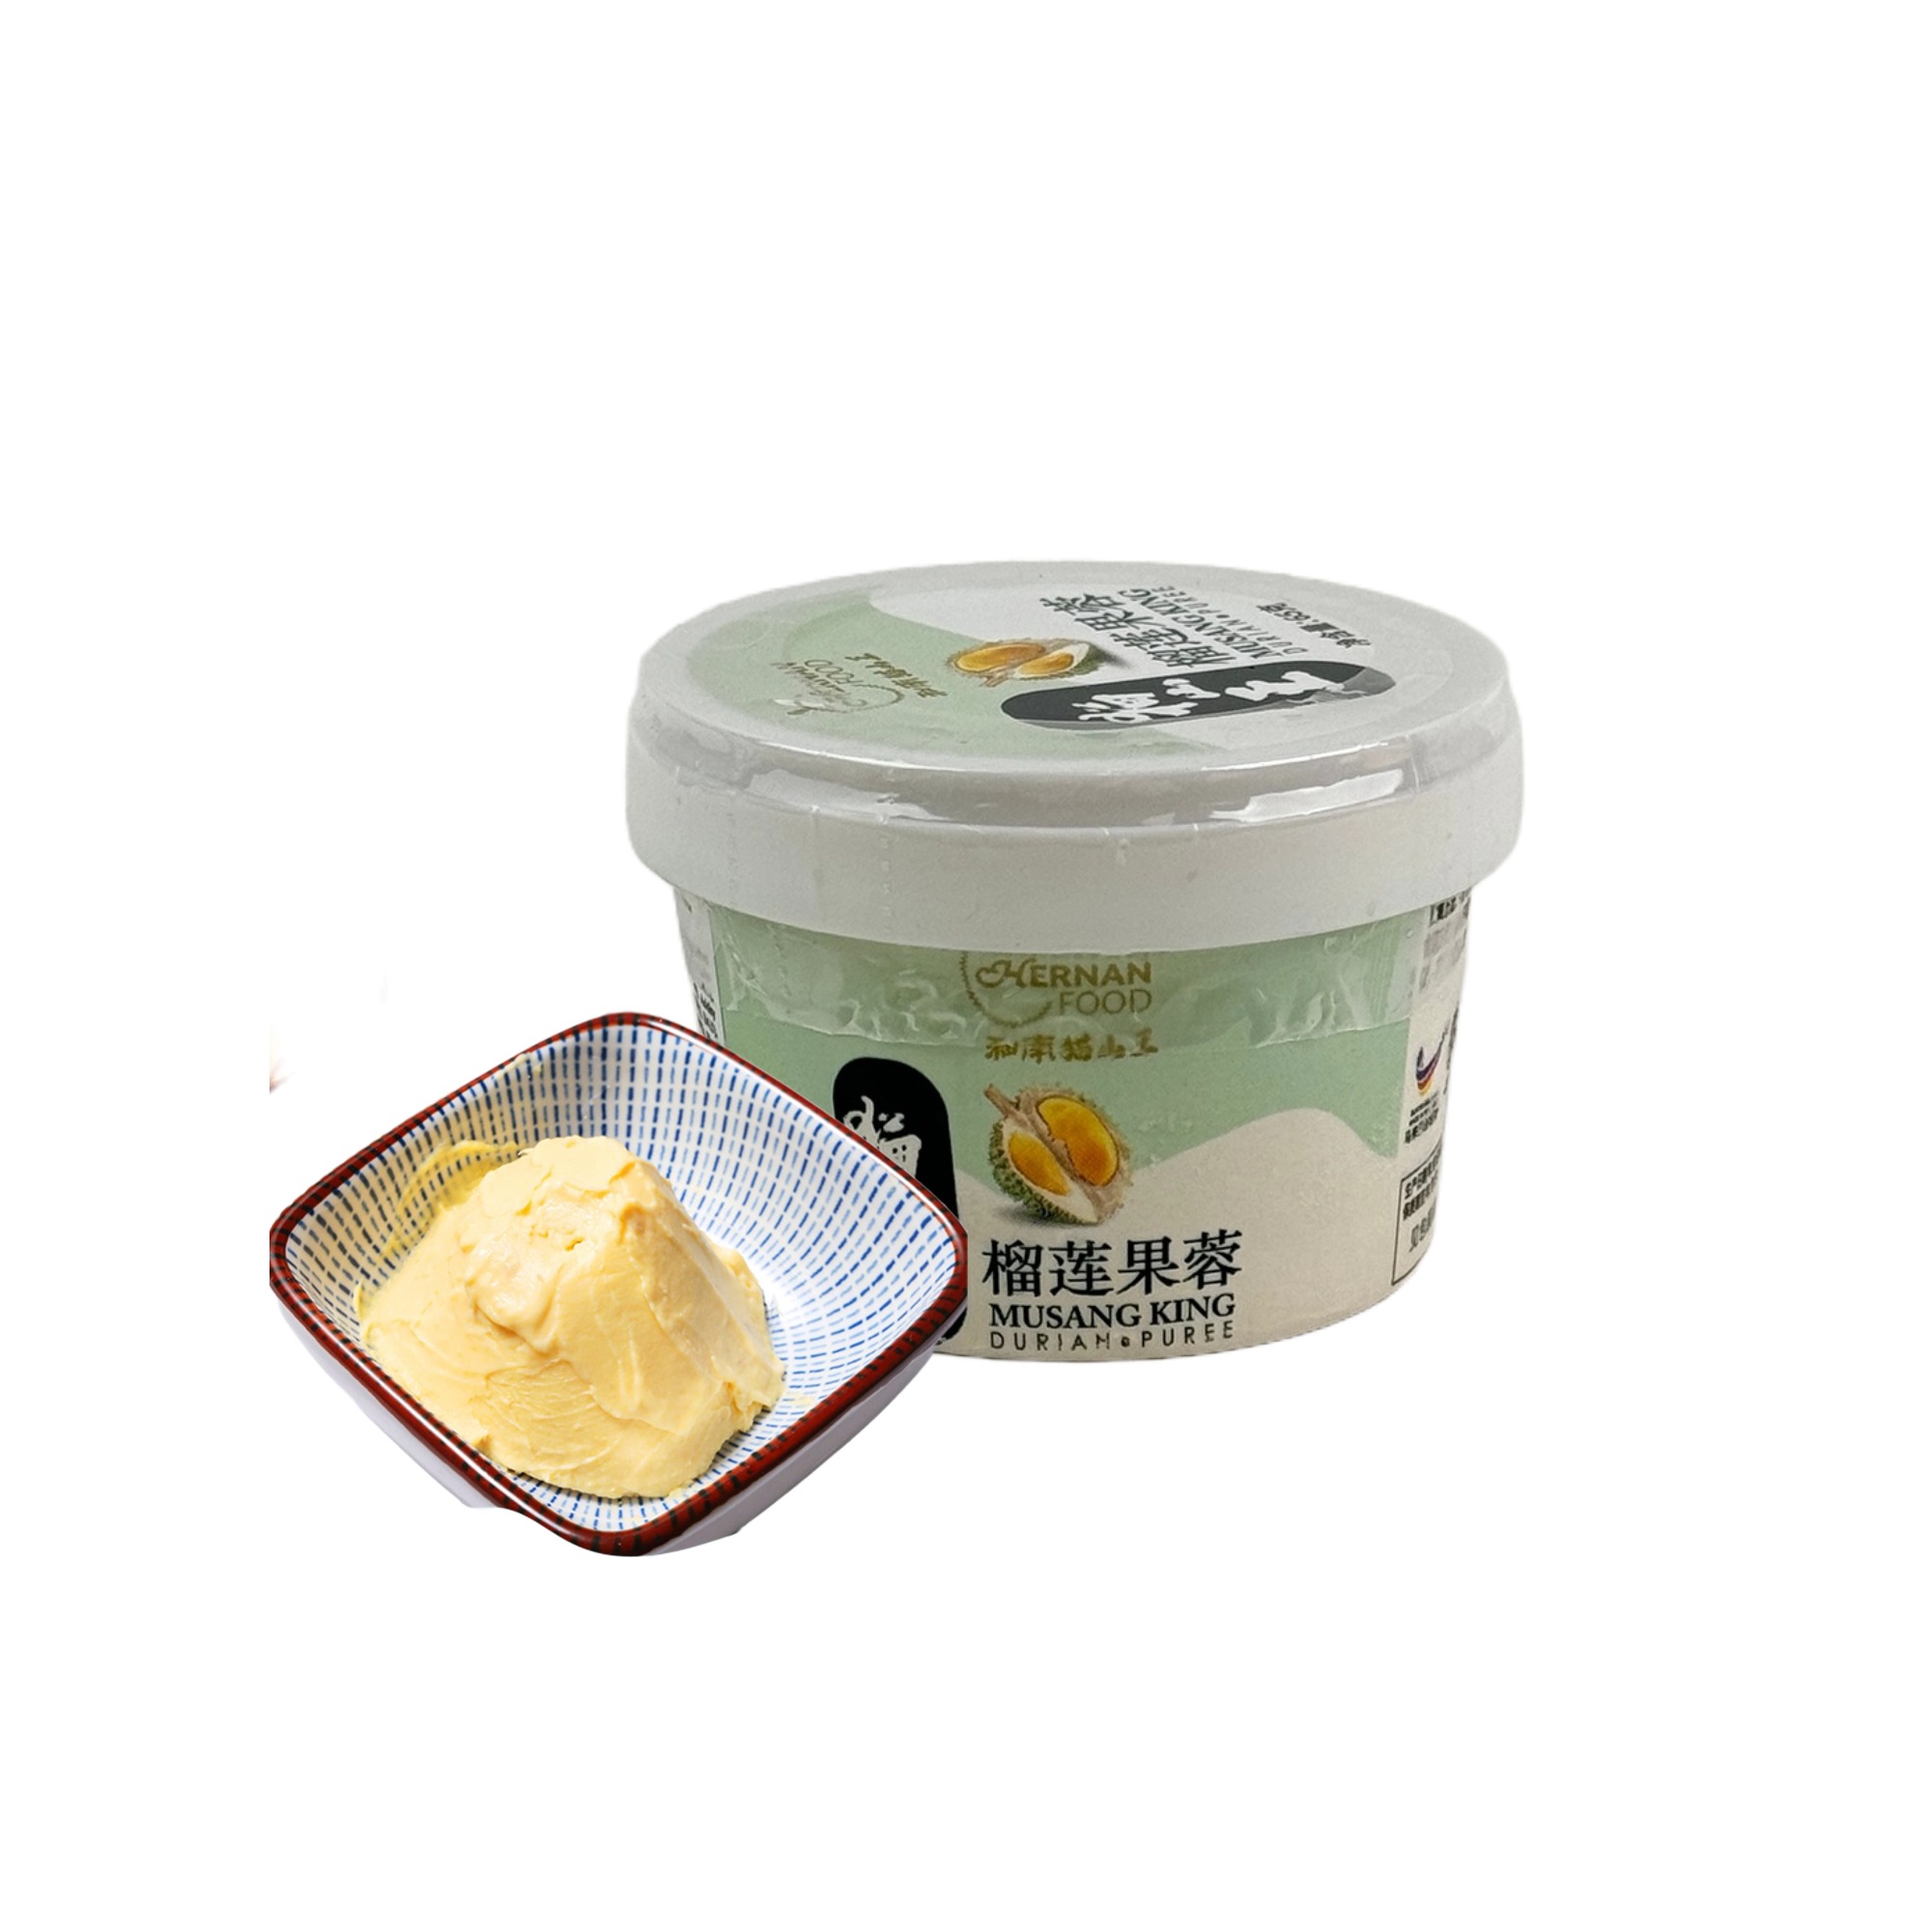 Malaysian and Southern Musang King Durian Puree 65g-eBest-Ice cream,Snacks & Confectionery